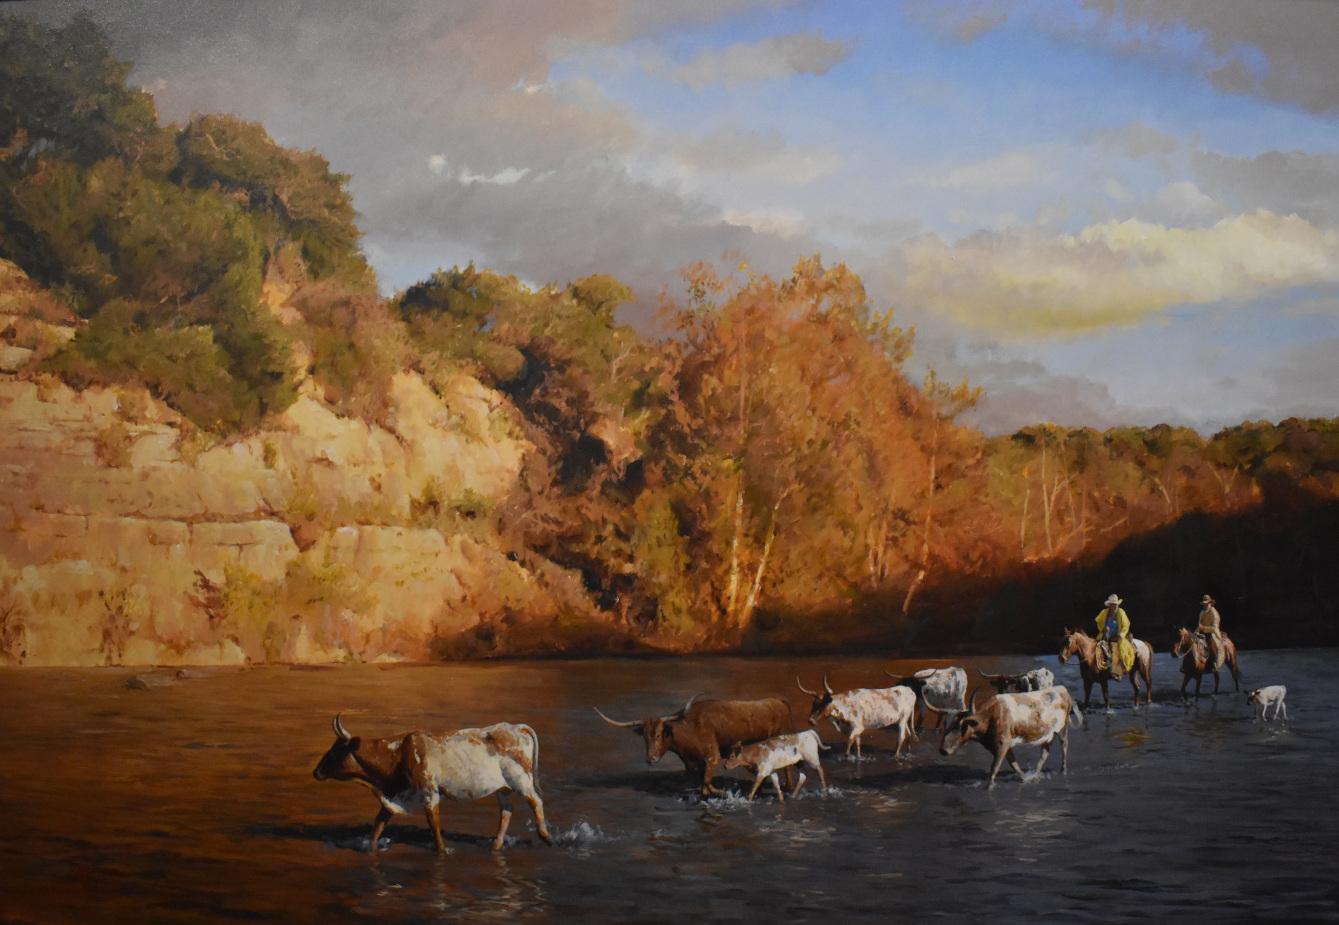 "THE TEXAS WAY" HILL COUNTRY James Robinson (1944-2015) LONGHORNS FRAME 48 X 60 